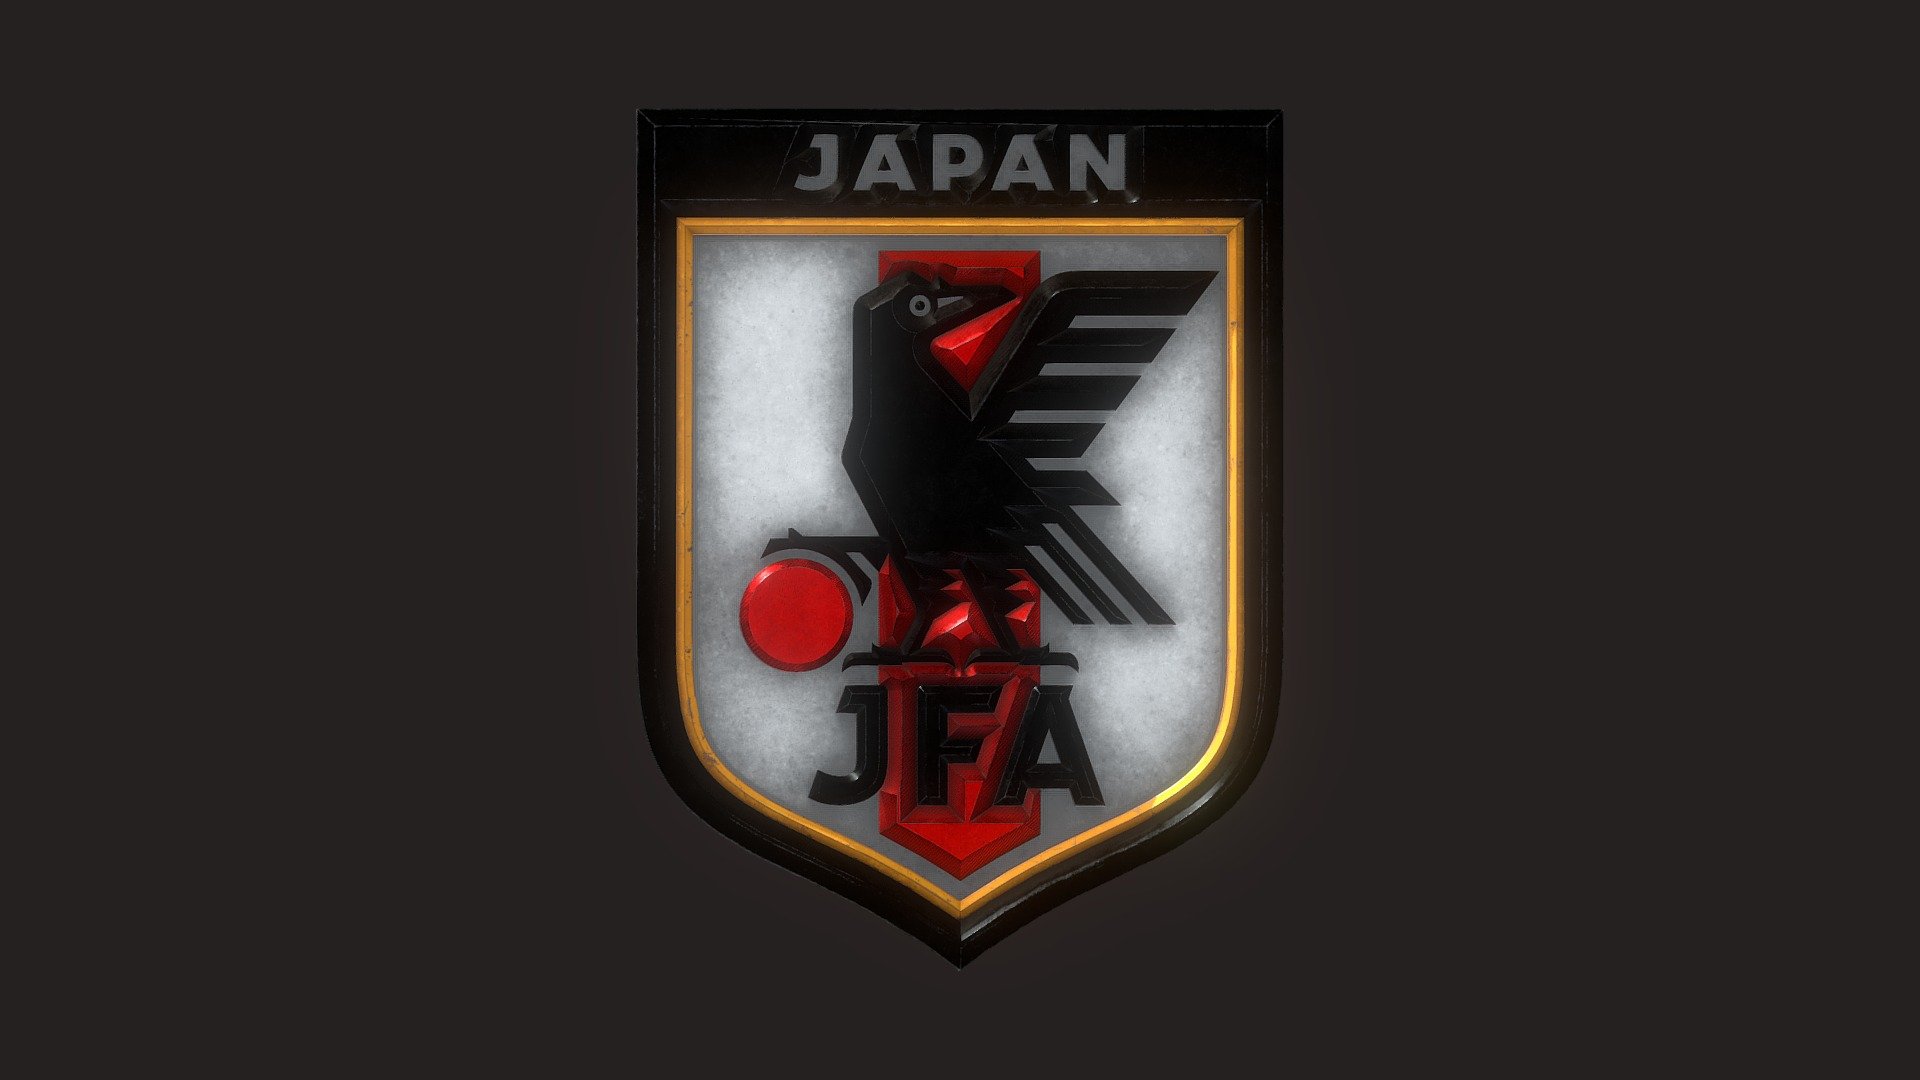 3D stylized badge of Japan national football team, one of the teams qualified for the FIFA World Cup 2022.

This event it’s scheduled to take place in Qatar from 21 November to 18 December 2022

Made with Blender and Substance Painter 3d model